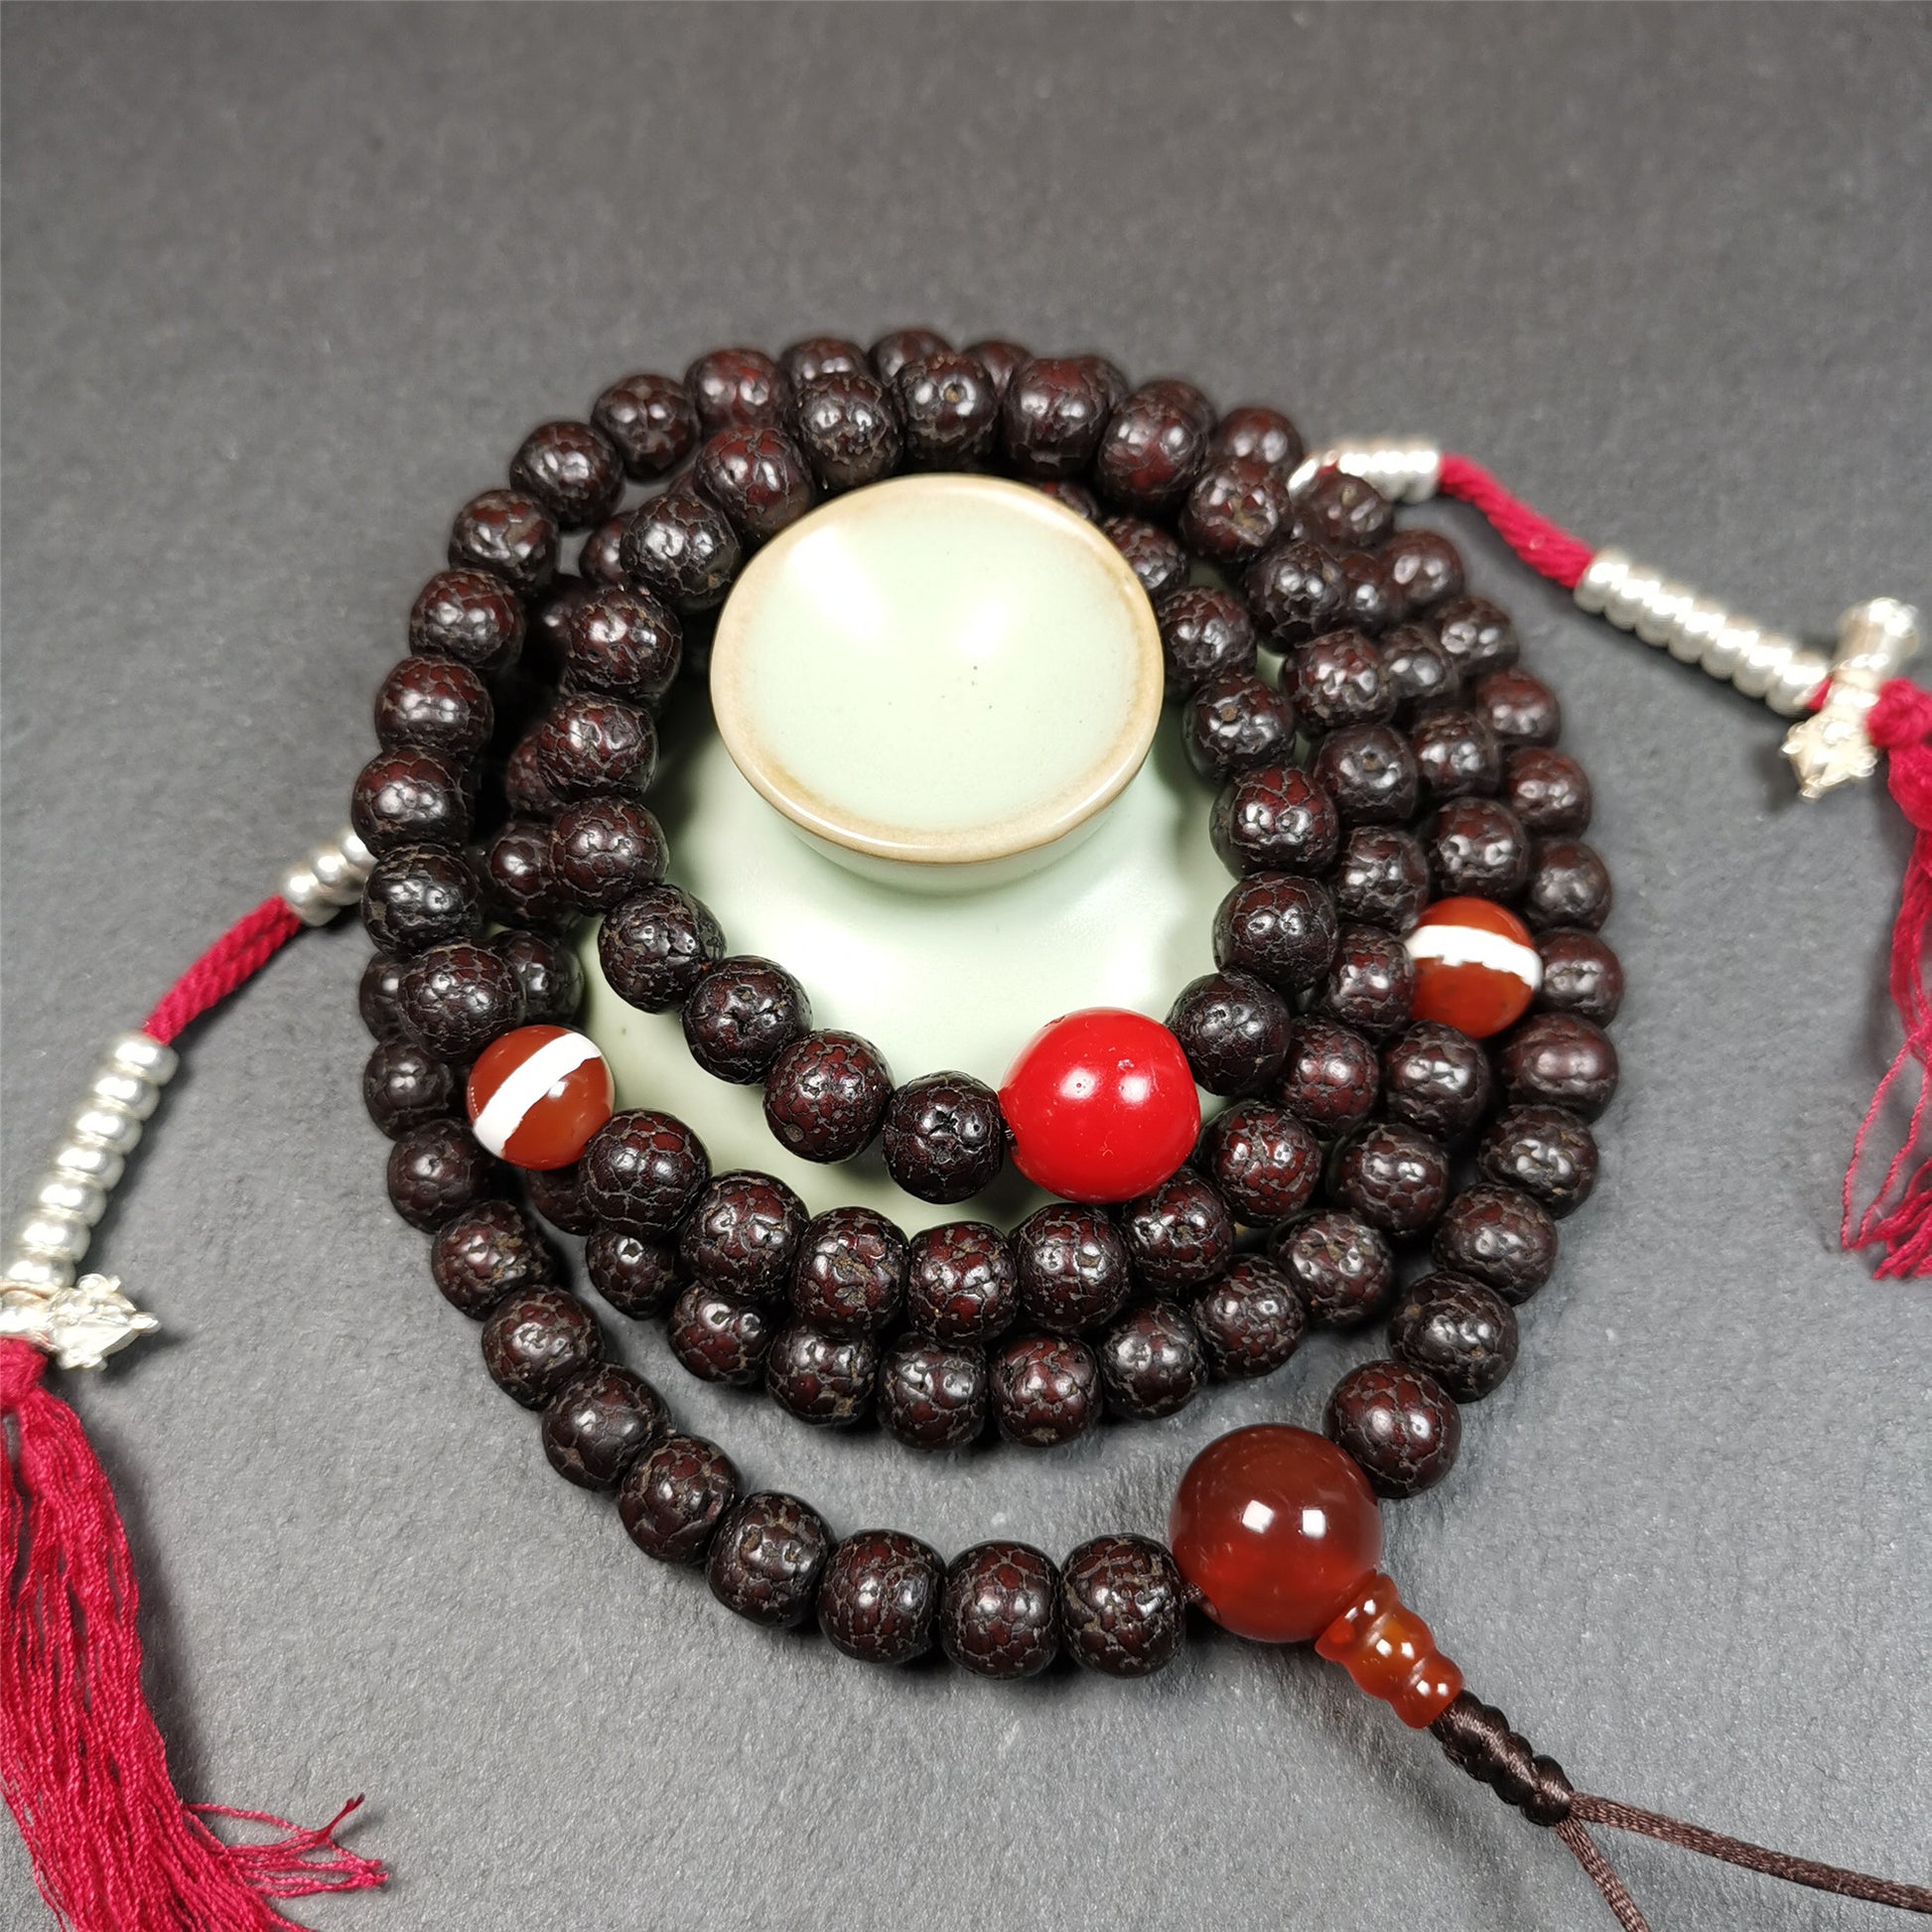 This mala is made by Tibetan craftsmen and come from Hepo Town, Baiyu County,Tibet, the birthplace of the famous Tibetan handicrafts. It's composed of 108 pcs 8mm lotus seed beads,with agate beads,and silver bead counters.